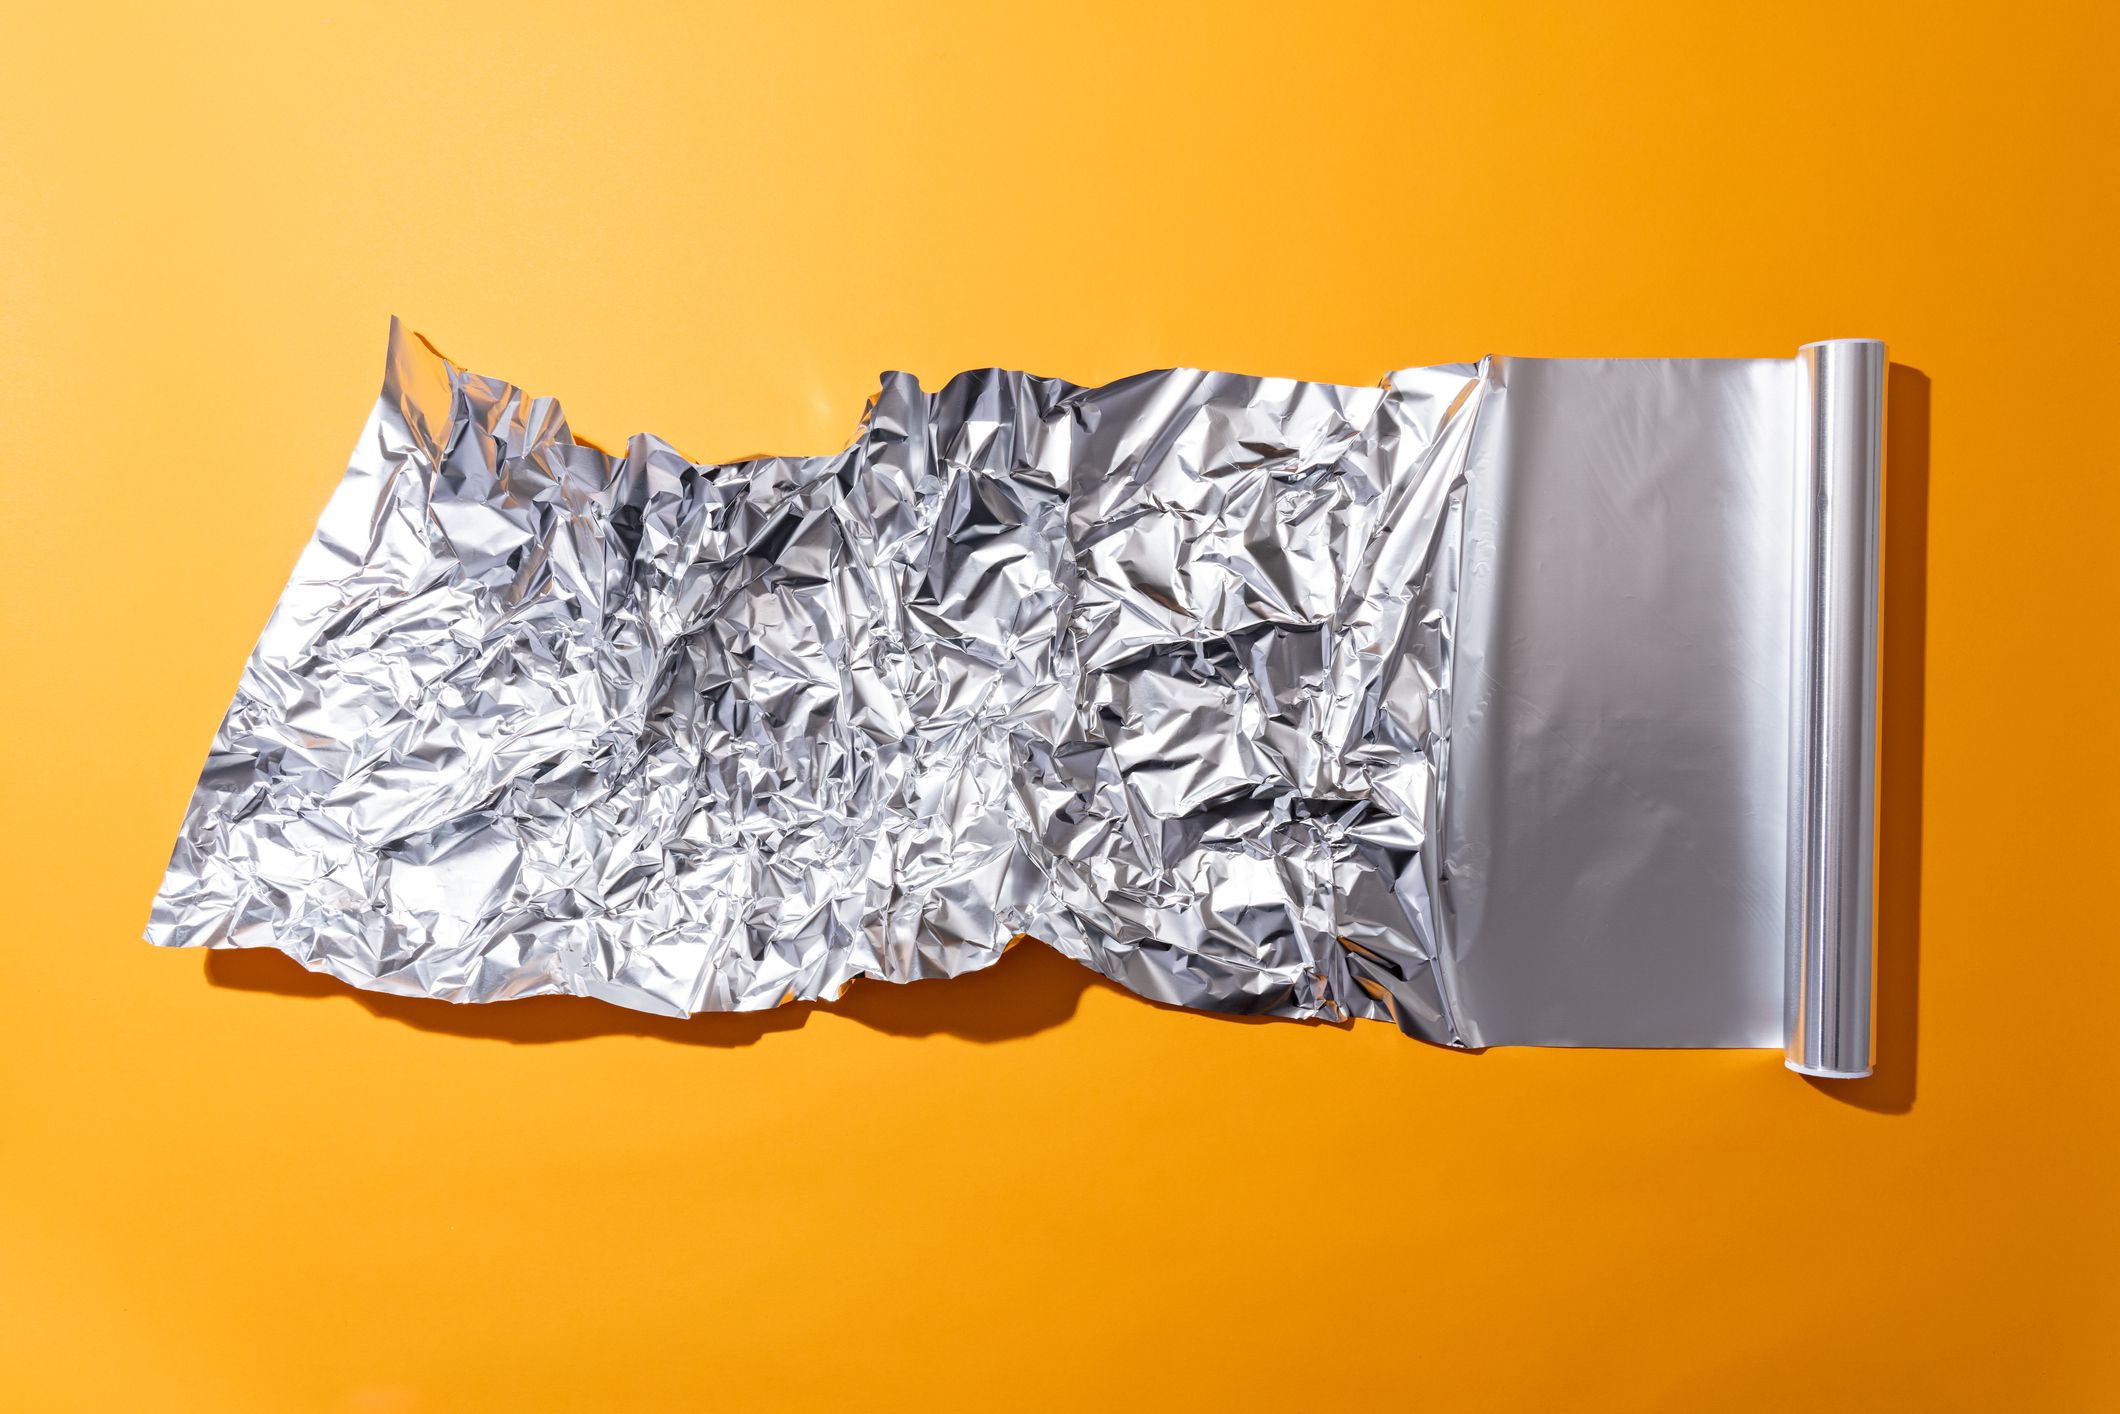 Eight surprising uses for foil you need to know about!